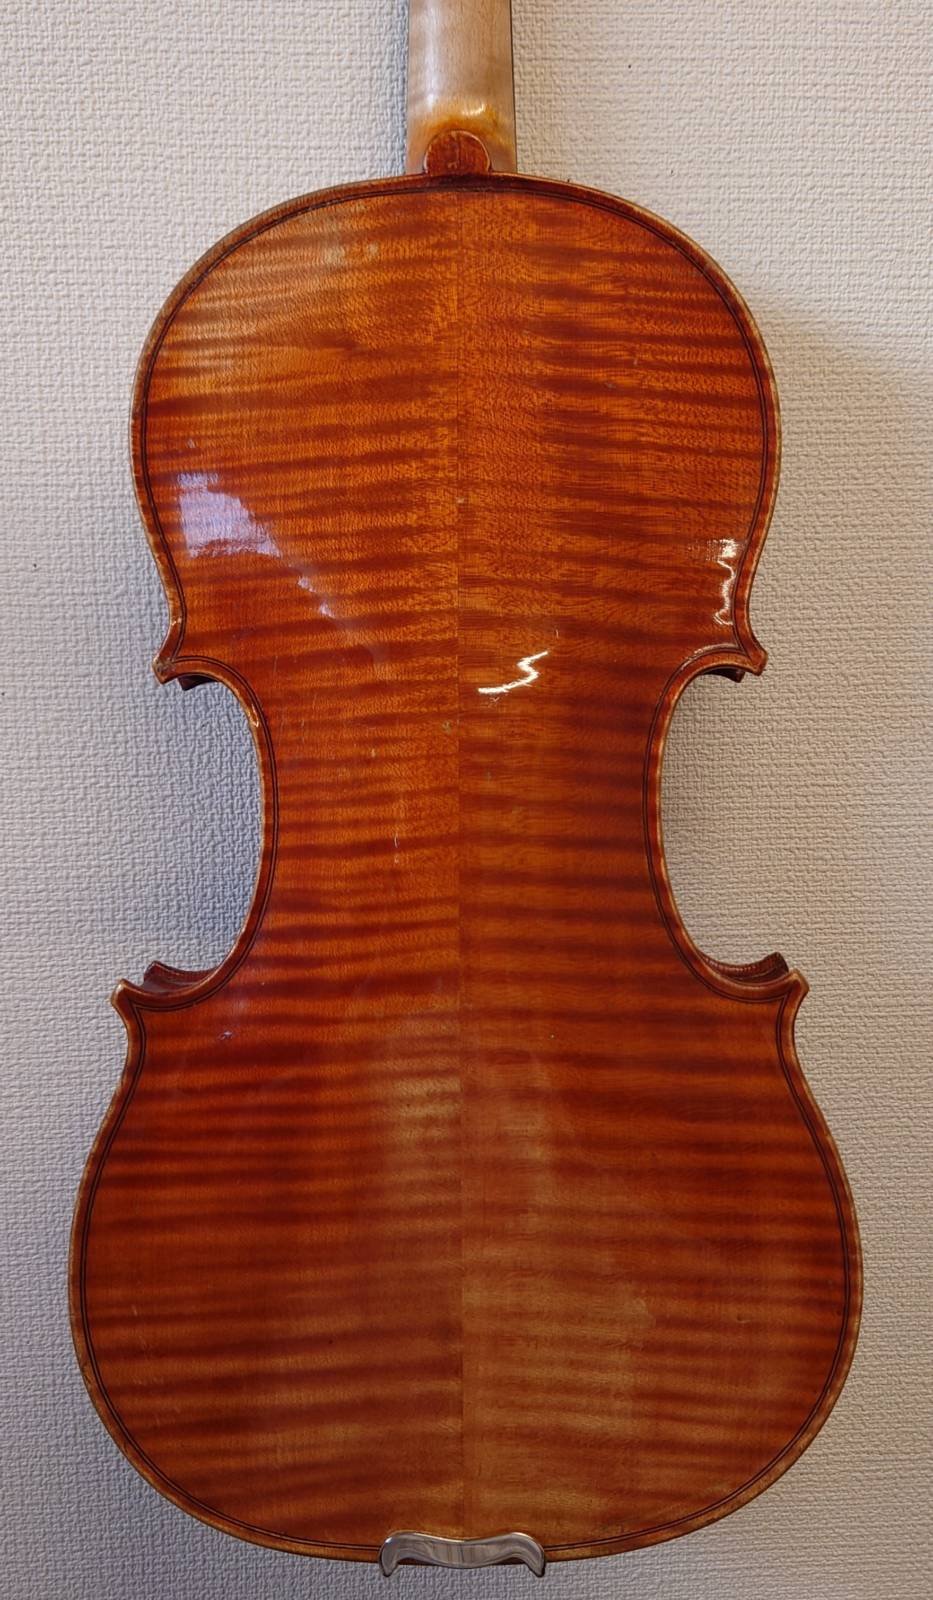 French violin Emile Miquel a mirecourt Expositions Universall cf 1891